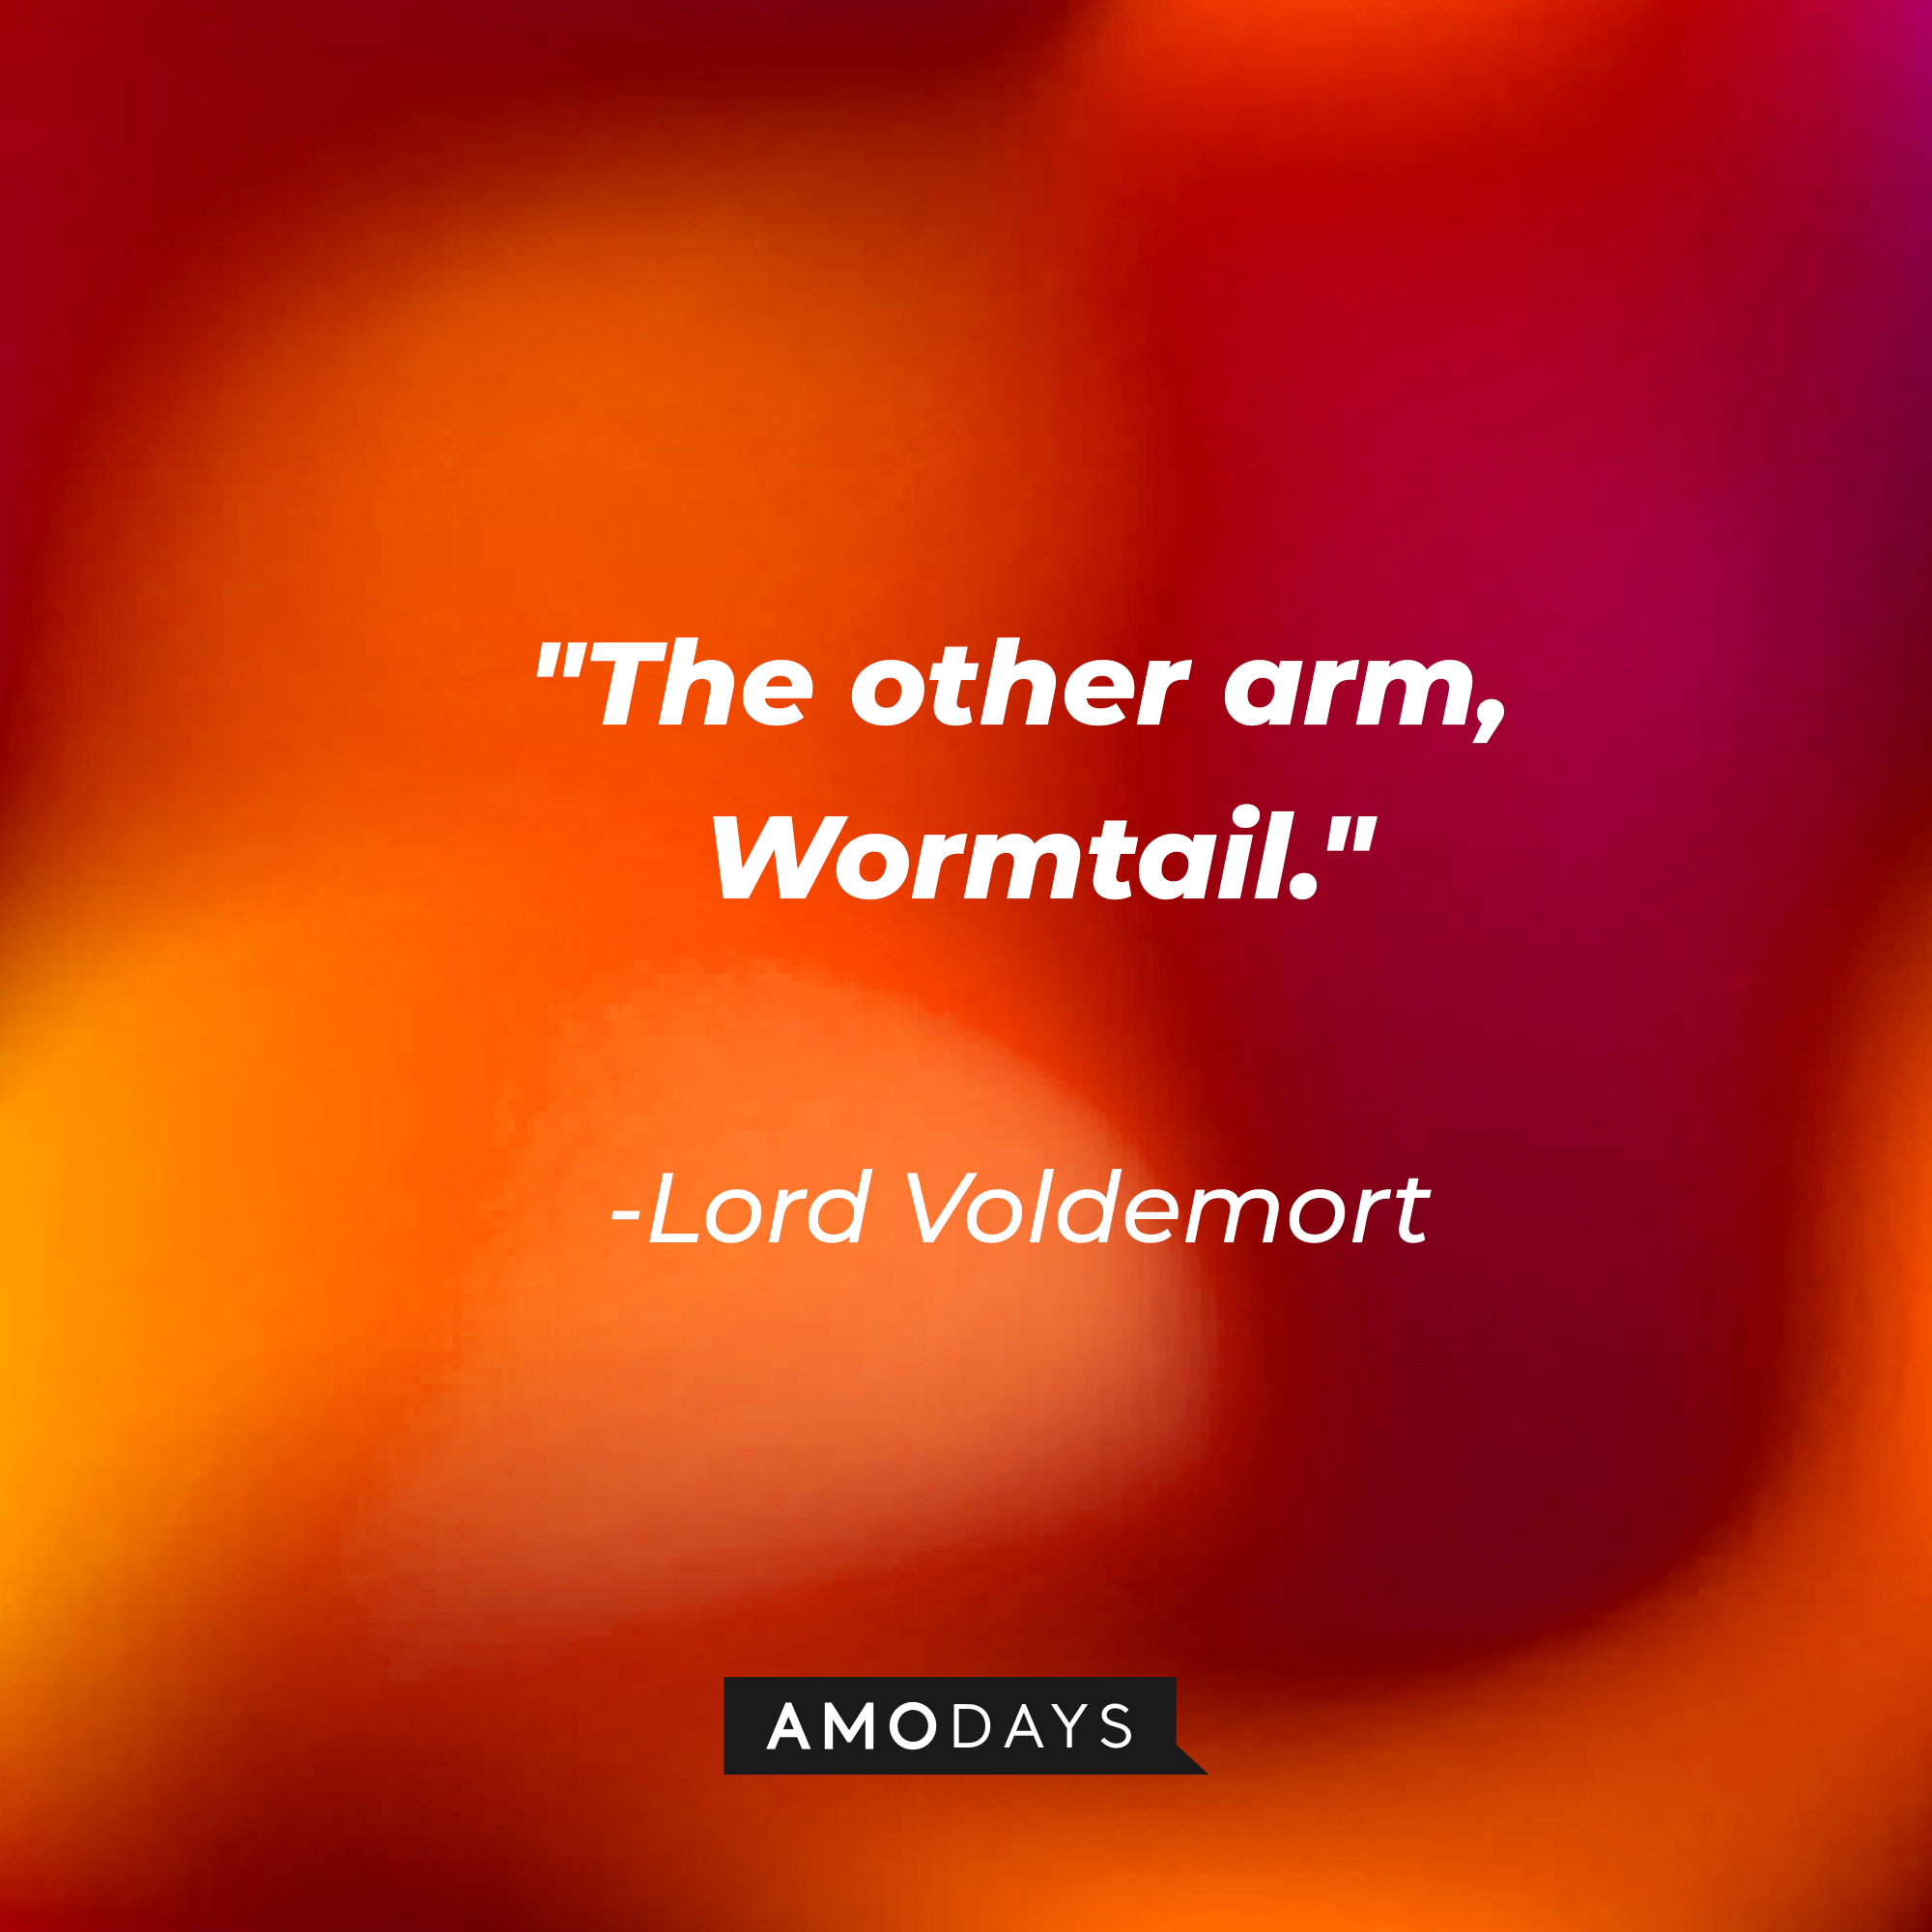 Lord Voldemort's quote: "The other arm, Wormtail." | Image: Amodays